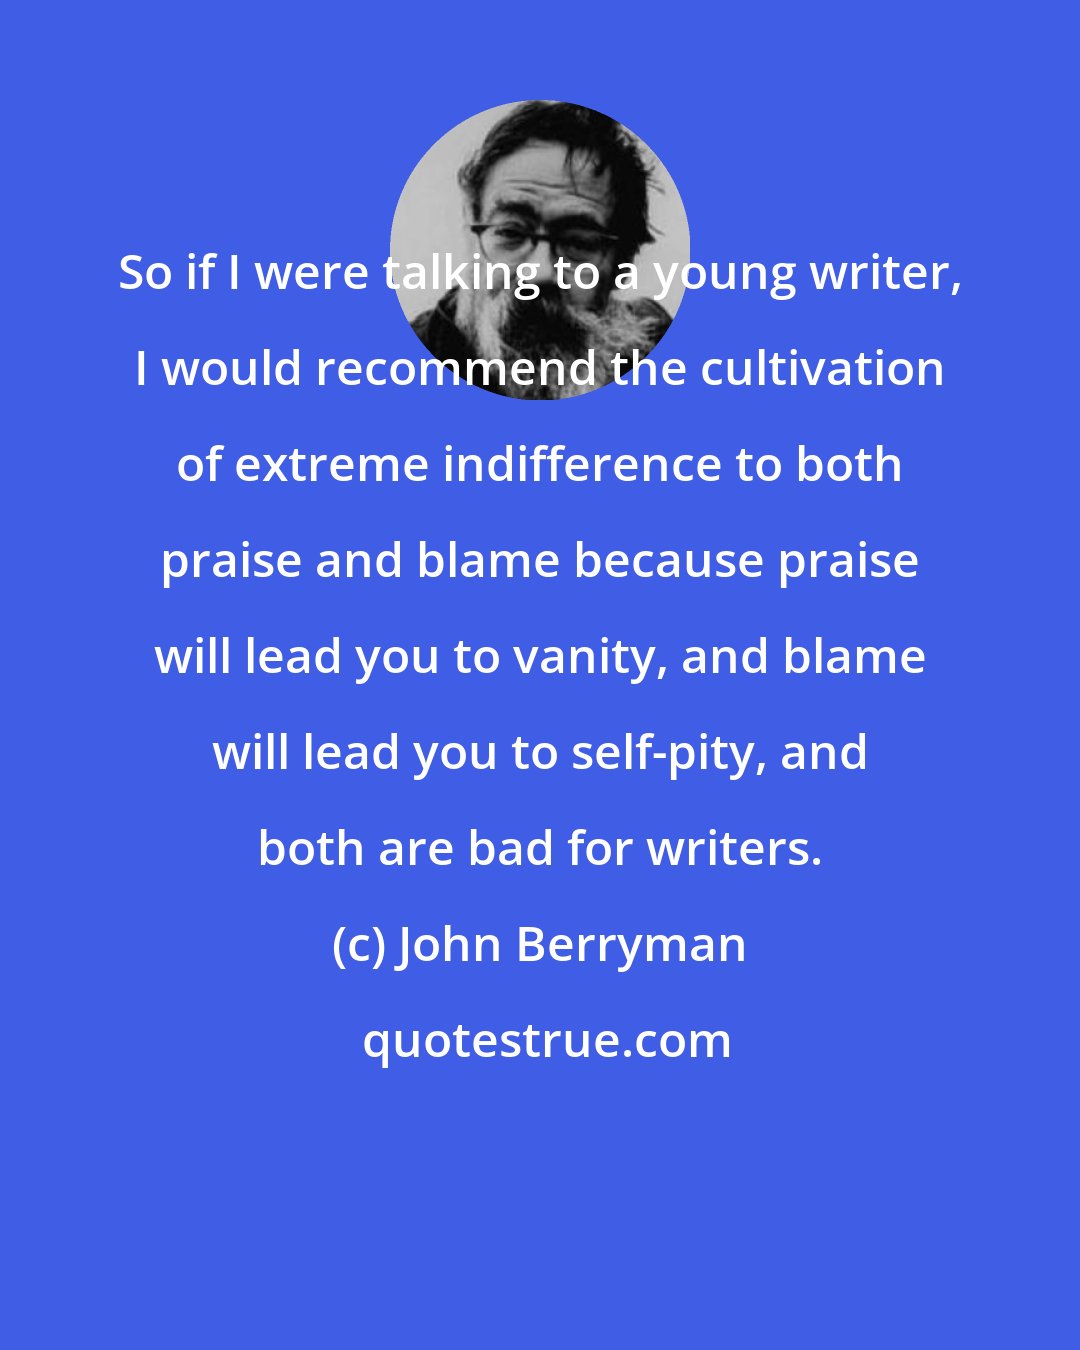 John Berryman: So if I were talking to a young writer, I would recommend the cultivation of extreme indifference to both praise and blame because praise will lead you to vanity, and blame will lead you to self-pity, and both are bad for writers.